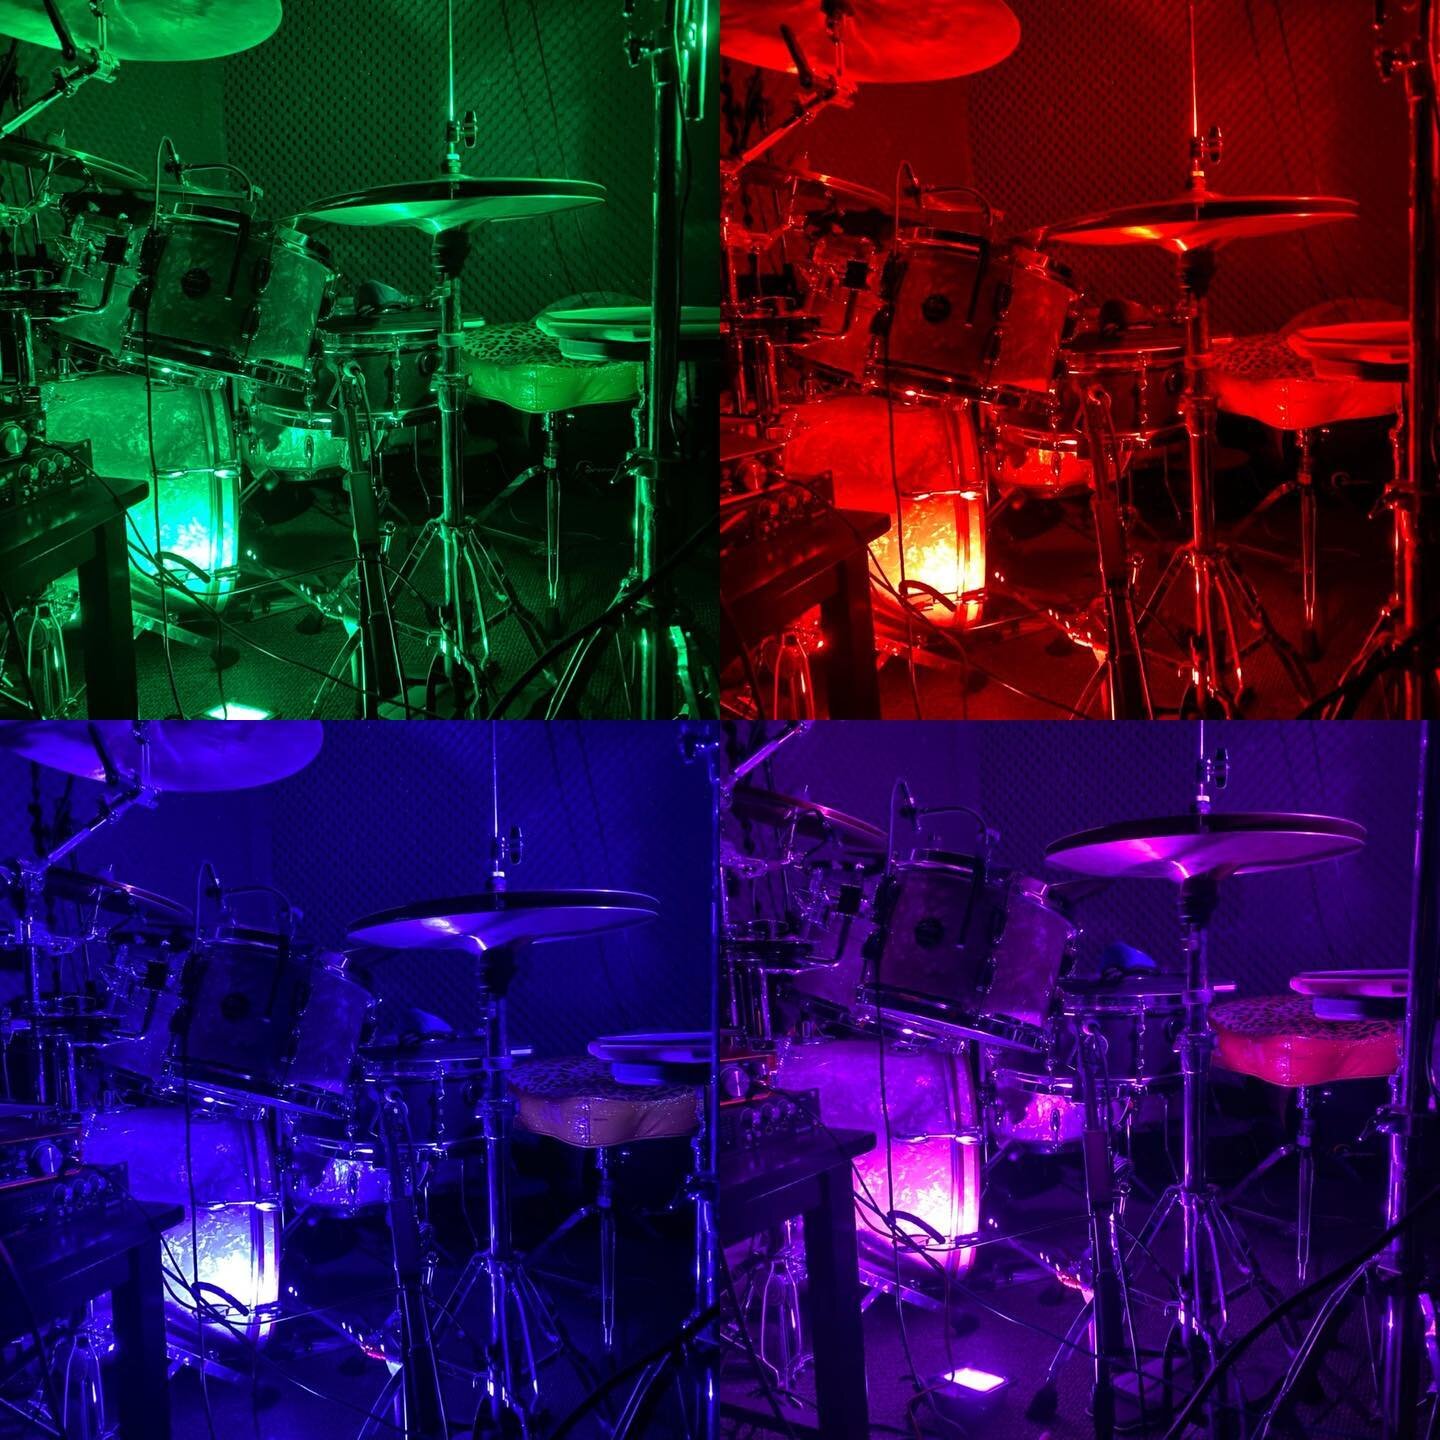 Out of control? Maybe.
.
Leveling up my lighting game.
.
#drums #drumlights #lights #colors #gretschdrums #dreamcymbals #green #red #blue #violet